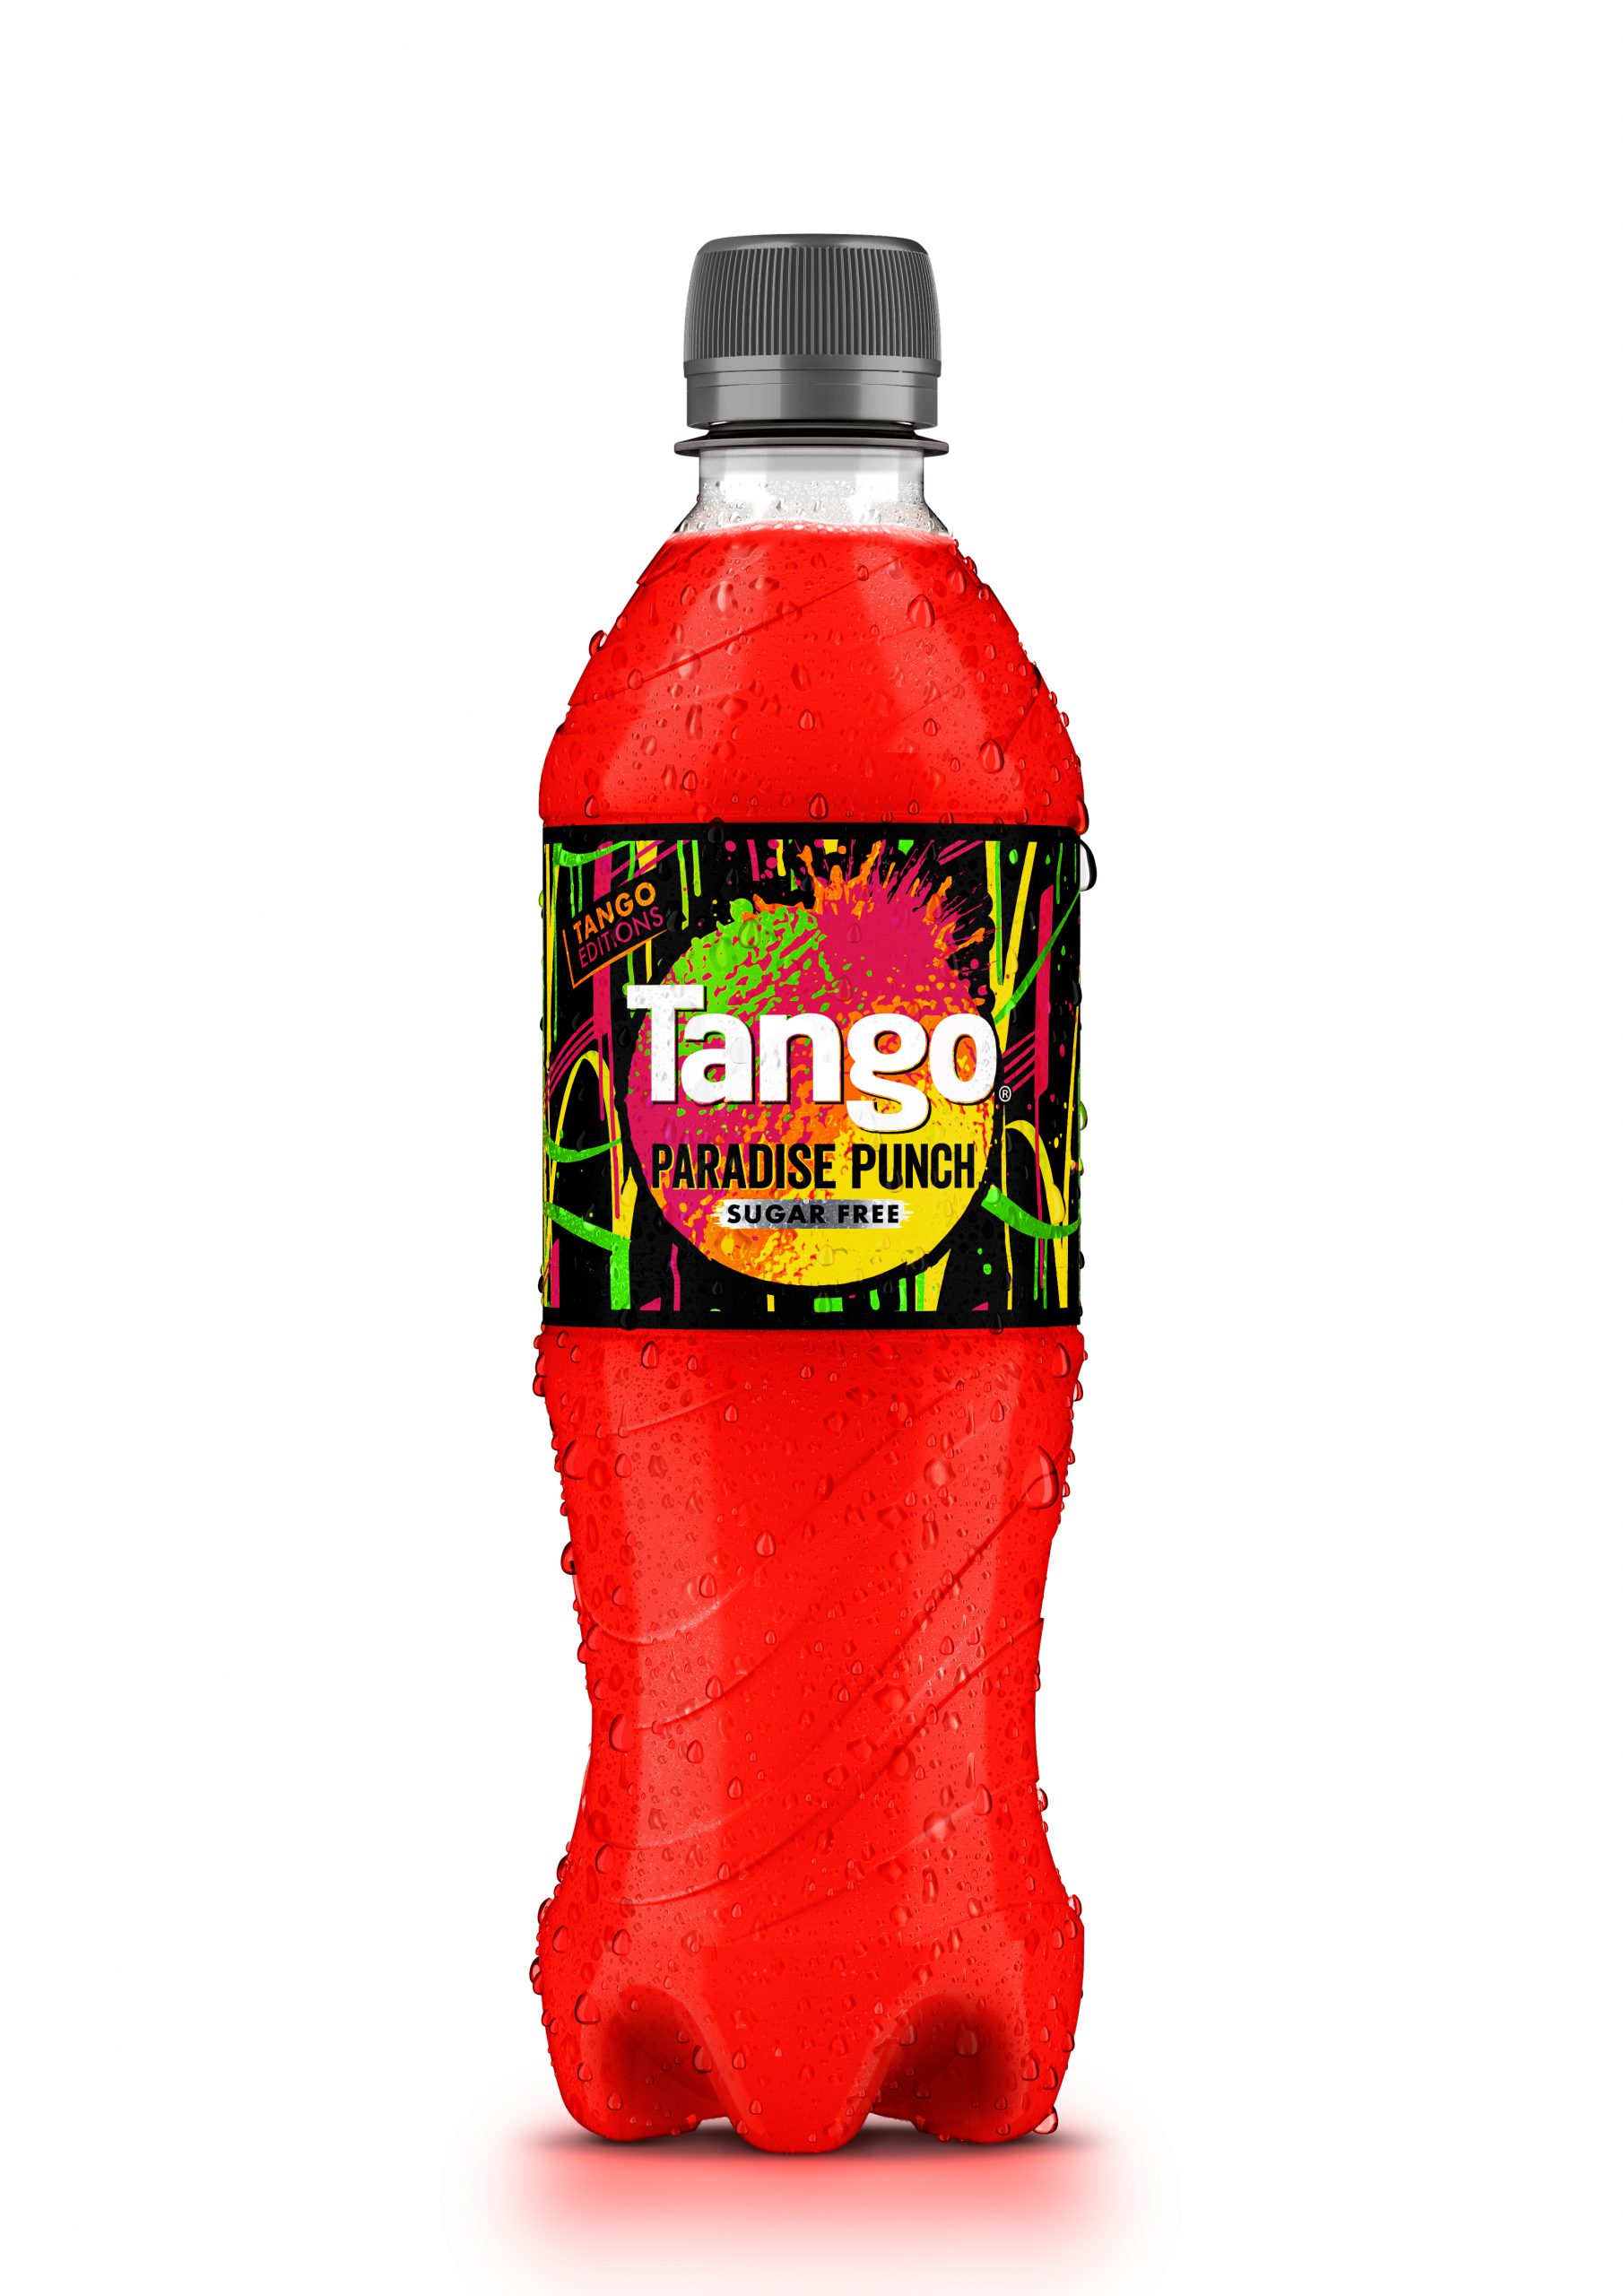 Tango releases bold new 'Editions' flavour – Paradise Punch Sugar Free